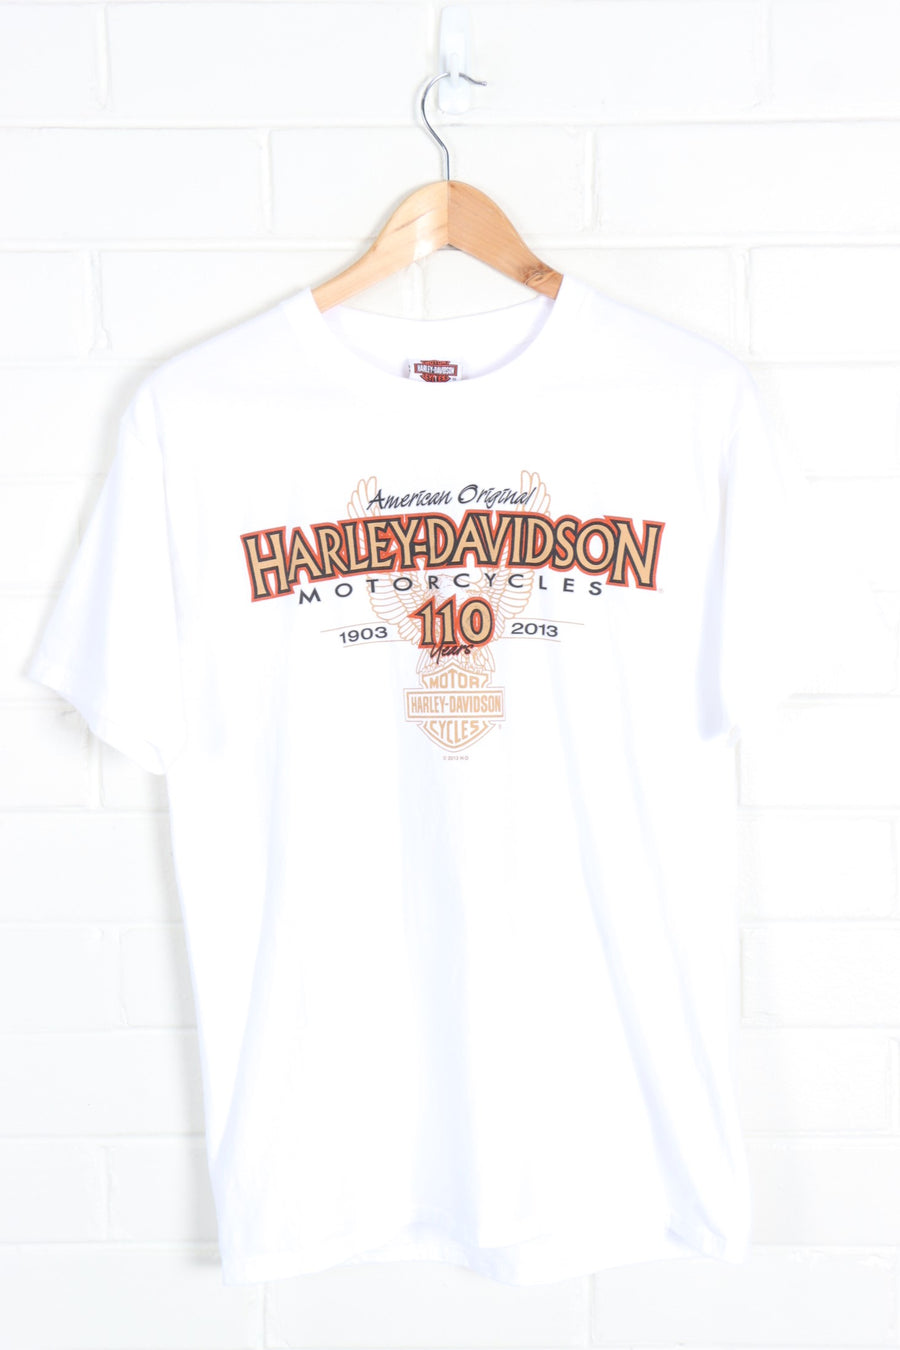 HARLEY DAVIDSON 110 Years Lighthouse Wisconsin Print Tee (M) - Vintage Sole Melbourne